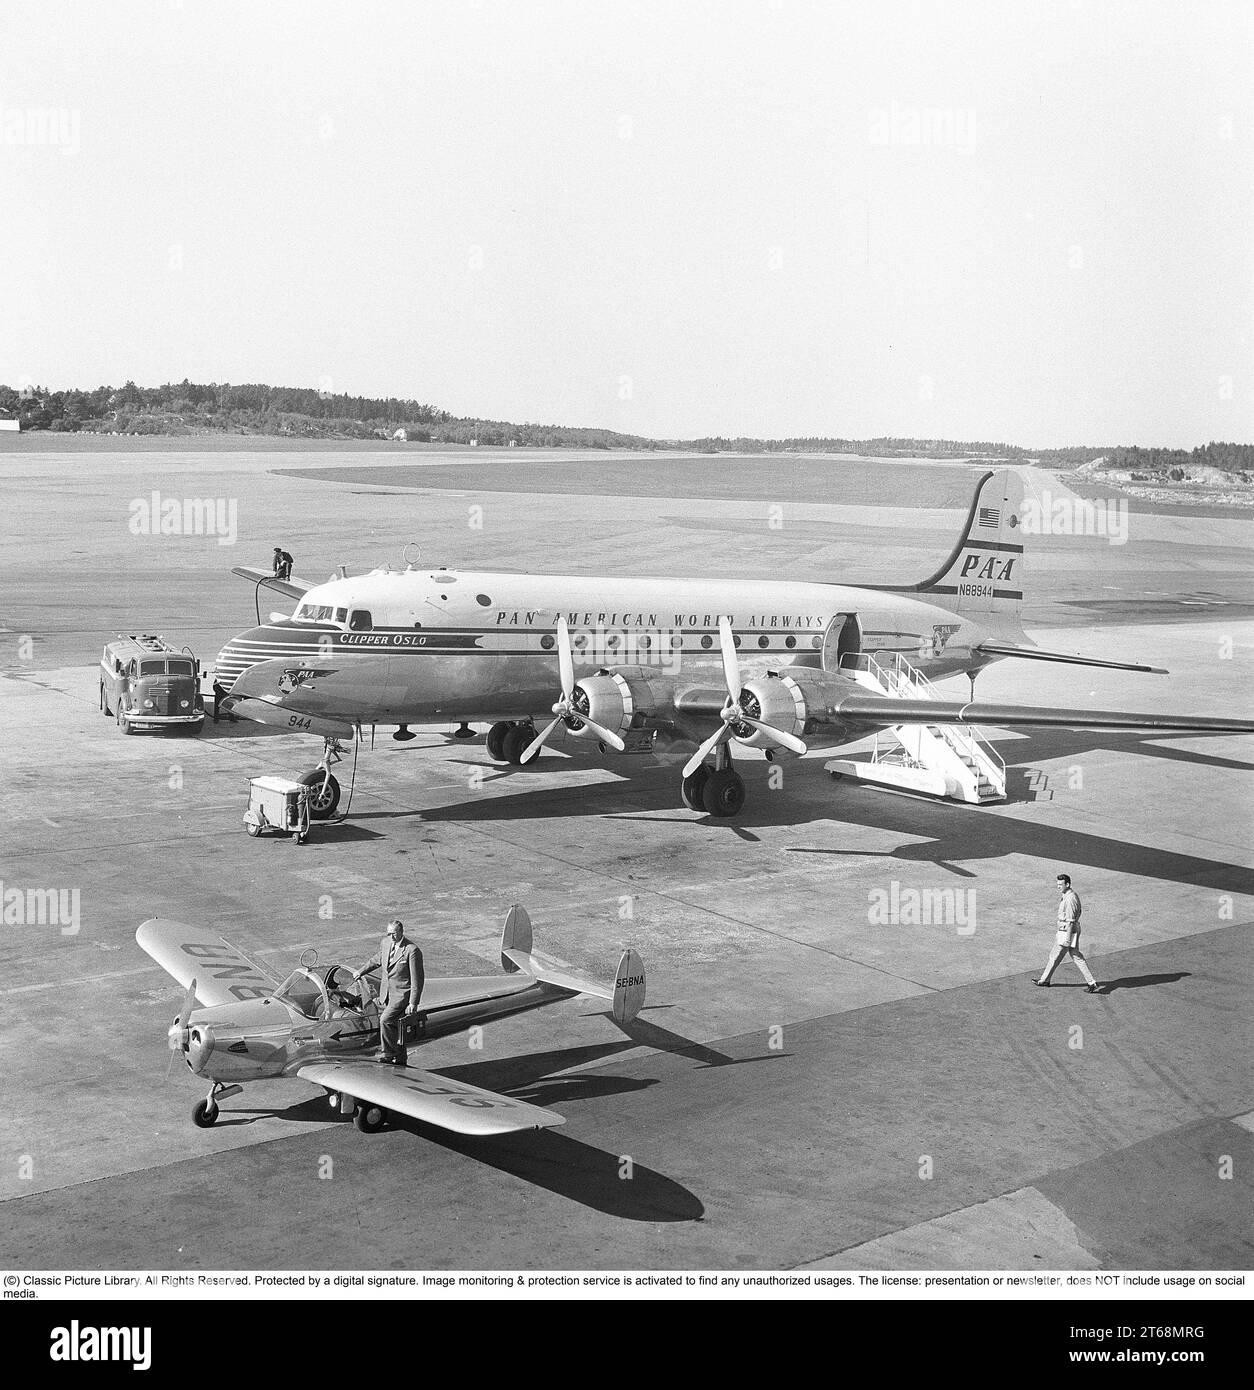 1950s airport. A Douglas DC-4 of Pan American World Airways 'Clipper Oslo' PA-A N88944 being prepared and fueld before takeoff. A man is seen on the wing at the end of the gas pipe from the truck.  The smaller propeller aircraft is a Ercoupe 415 SE-BNA with a man with a briefcase about to step into the aircraft.    Sweden 1953. Kristoffersson ref BM42-3 Stock Photo